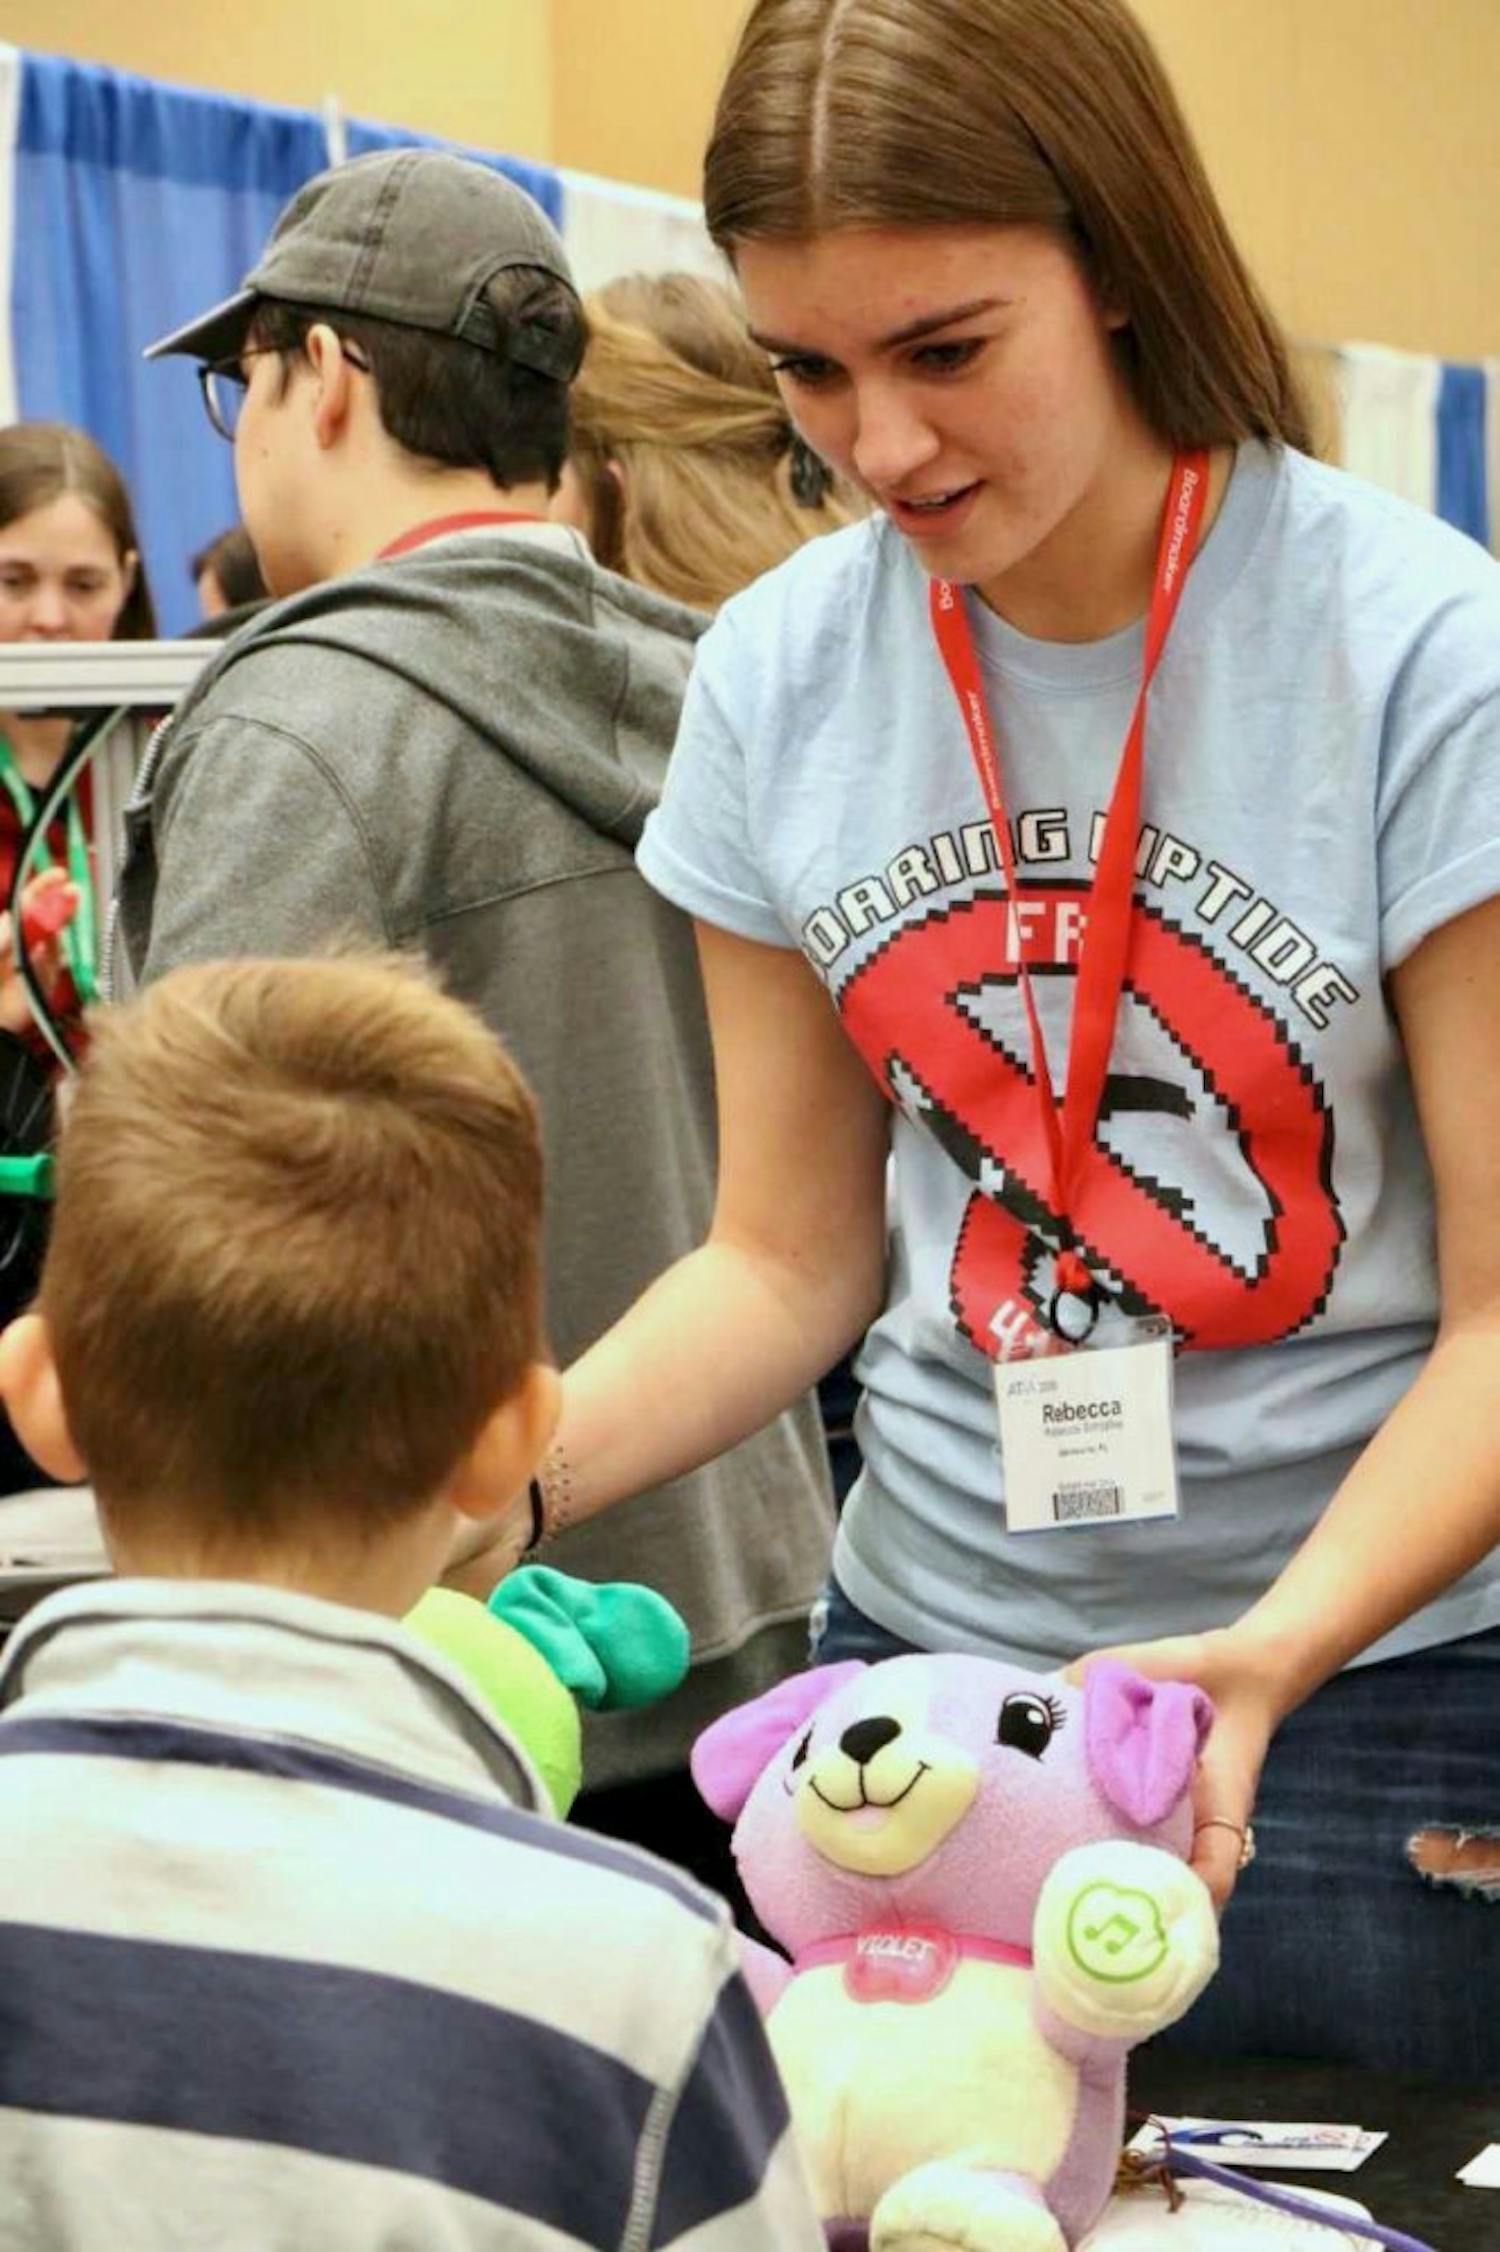 A student from P.K. Yonge Developmental Research School’s First Robotics Club, 12th-grader Rebecca Schlafke, demonstrates how to use the club’s adapted creations to a child at the Assistive Technology Industry Association Maker's Day on Saturday.
&nbsp;